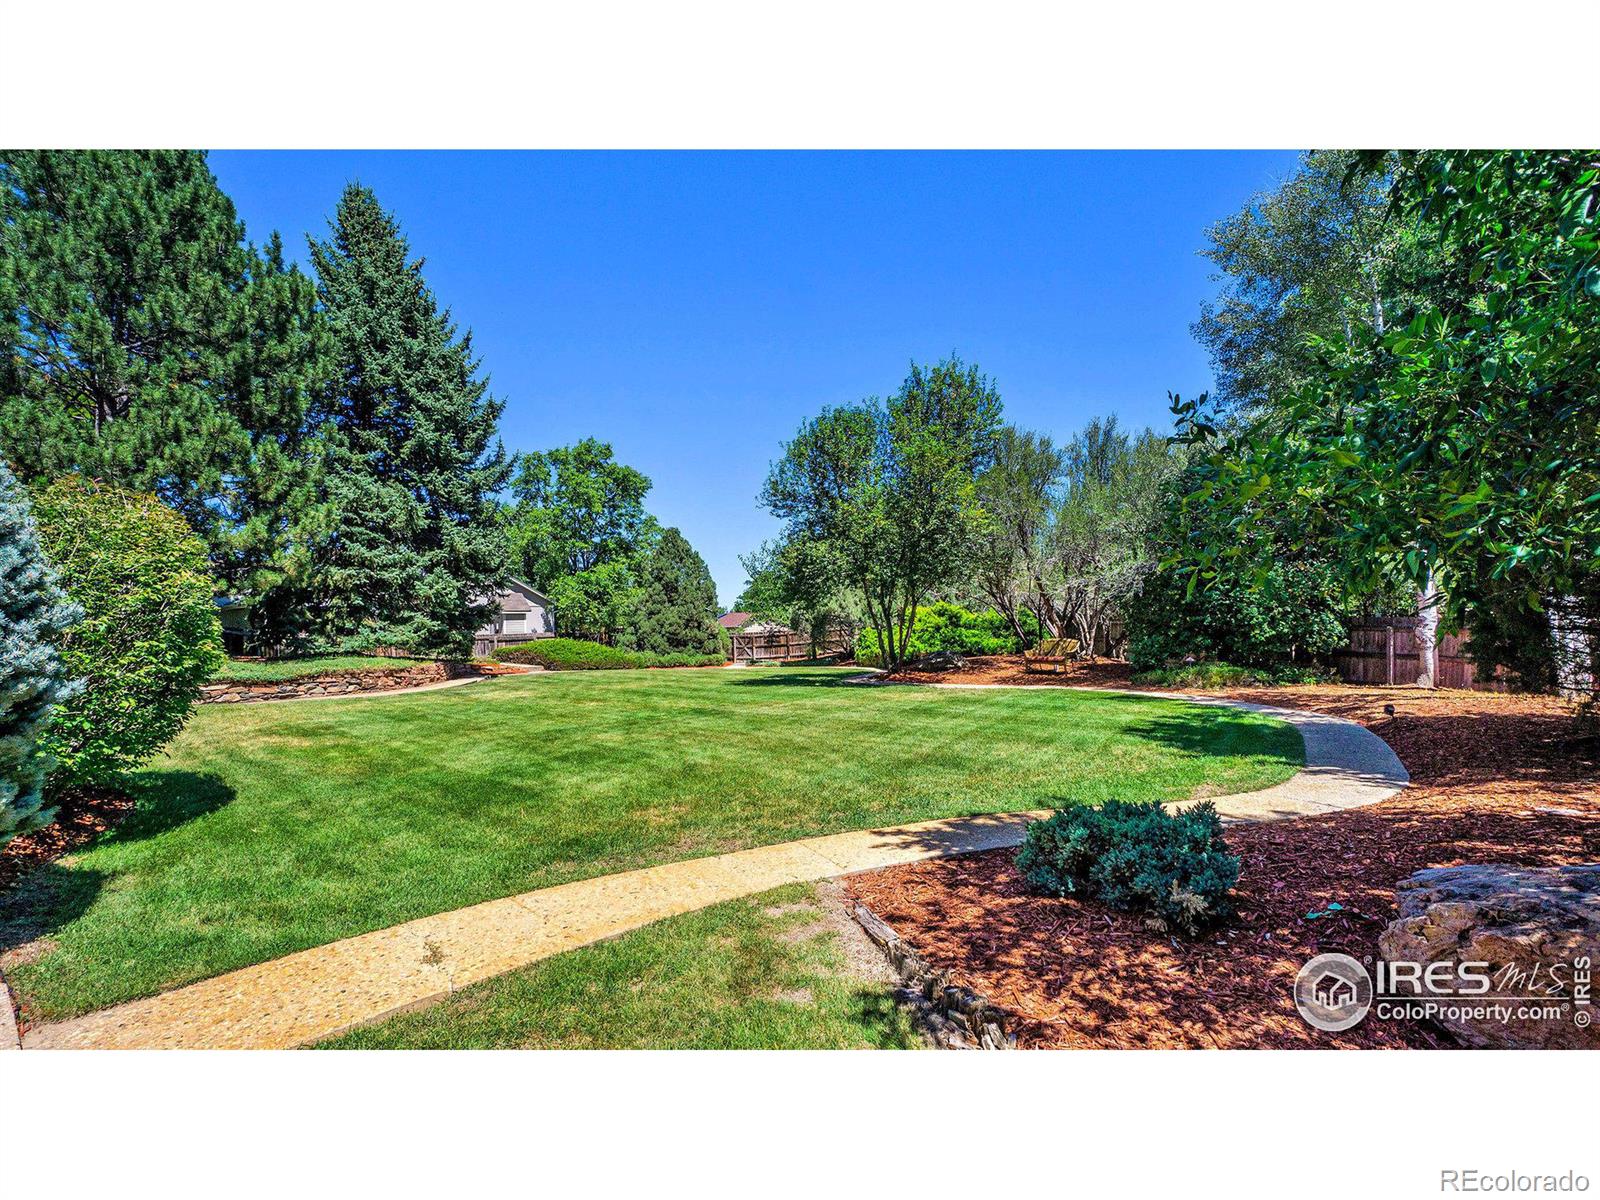 Report Image for 4267 W 14th St Rd,Greeley, Colorado